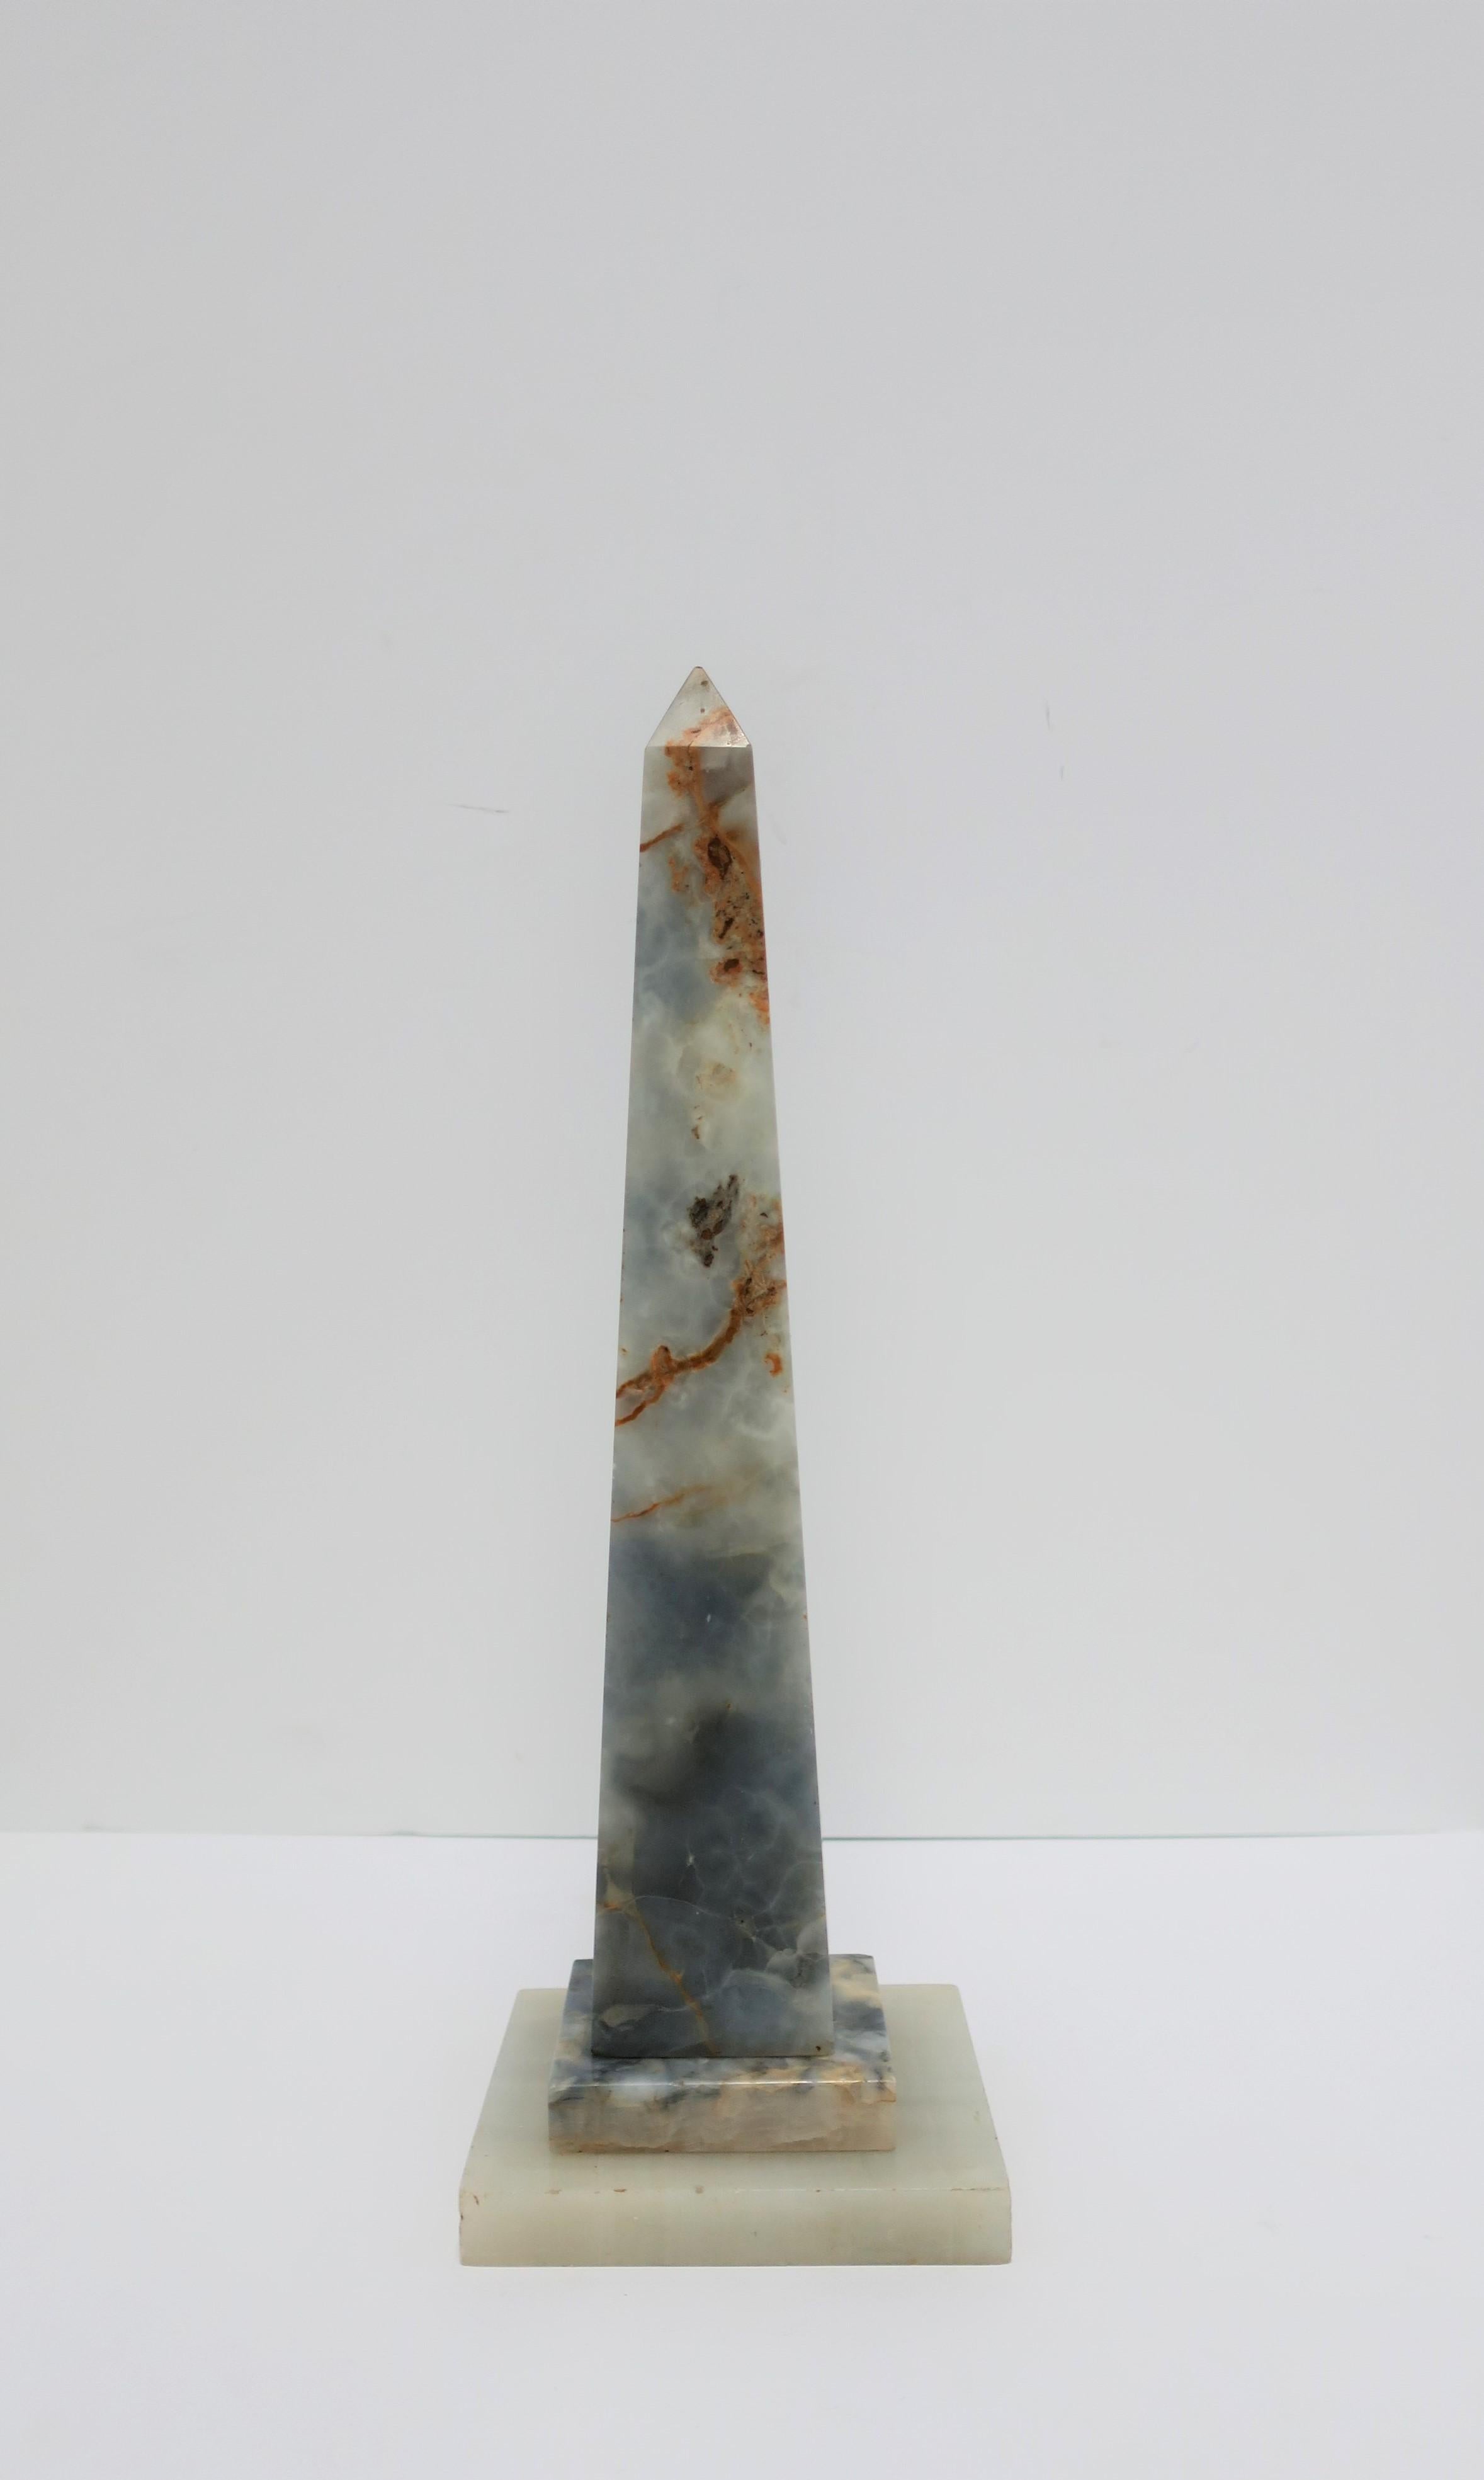 A relatively tall onyx obelisk sculpture piece in blue, light blue, white, and brown hues, in the style of Modern, circa mid-20th century or earlier, Italy. 

Piece measures: 15.25